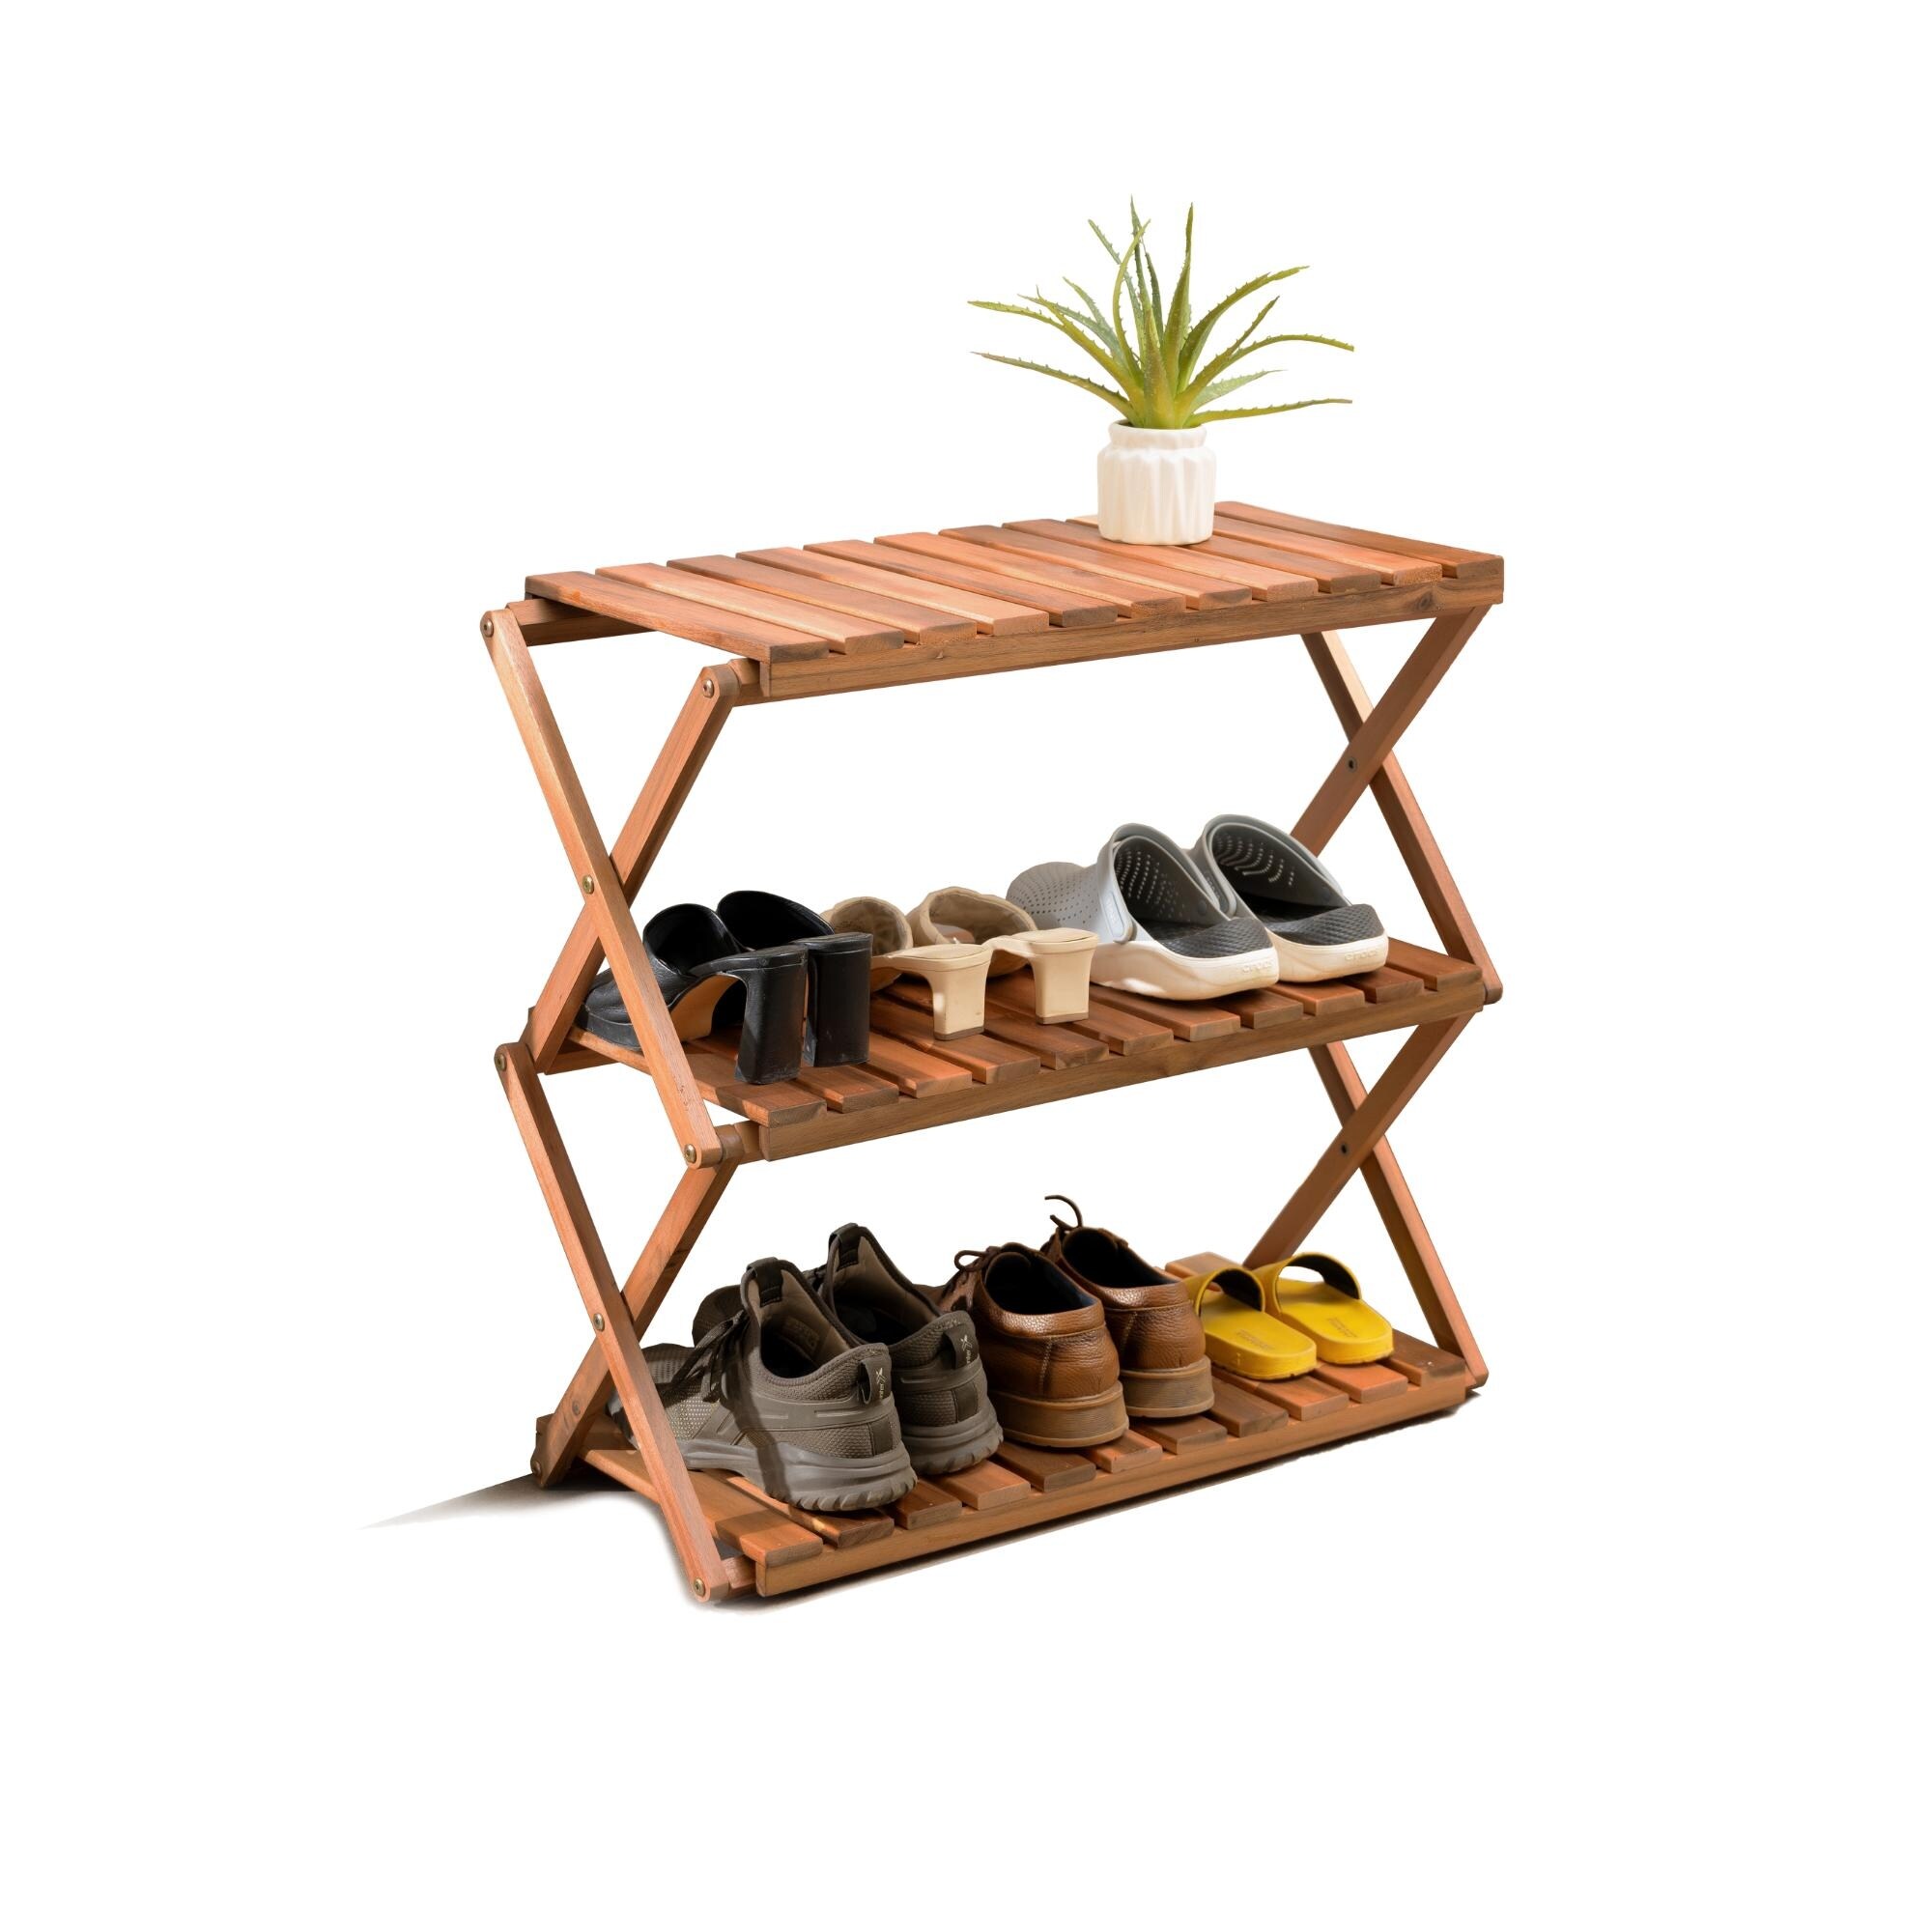 https://ak1.ostkcdn.com/images/products/is/images/direct/a78978a5dd8d33dc6ad0e5e1cdc4605c22f75ab7/3-Tiers-Plants-Stand-Foldable-Shoe-Rack-Multipurpose-Shelf.jpg